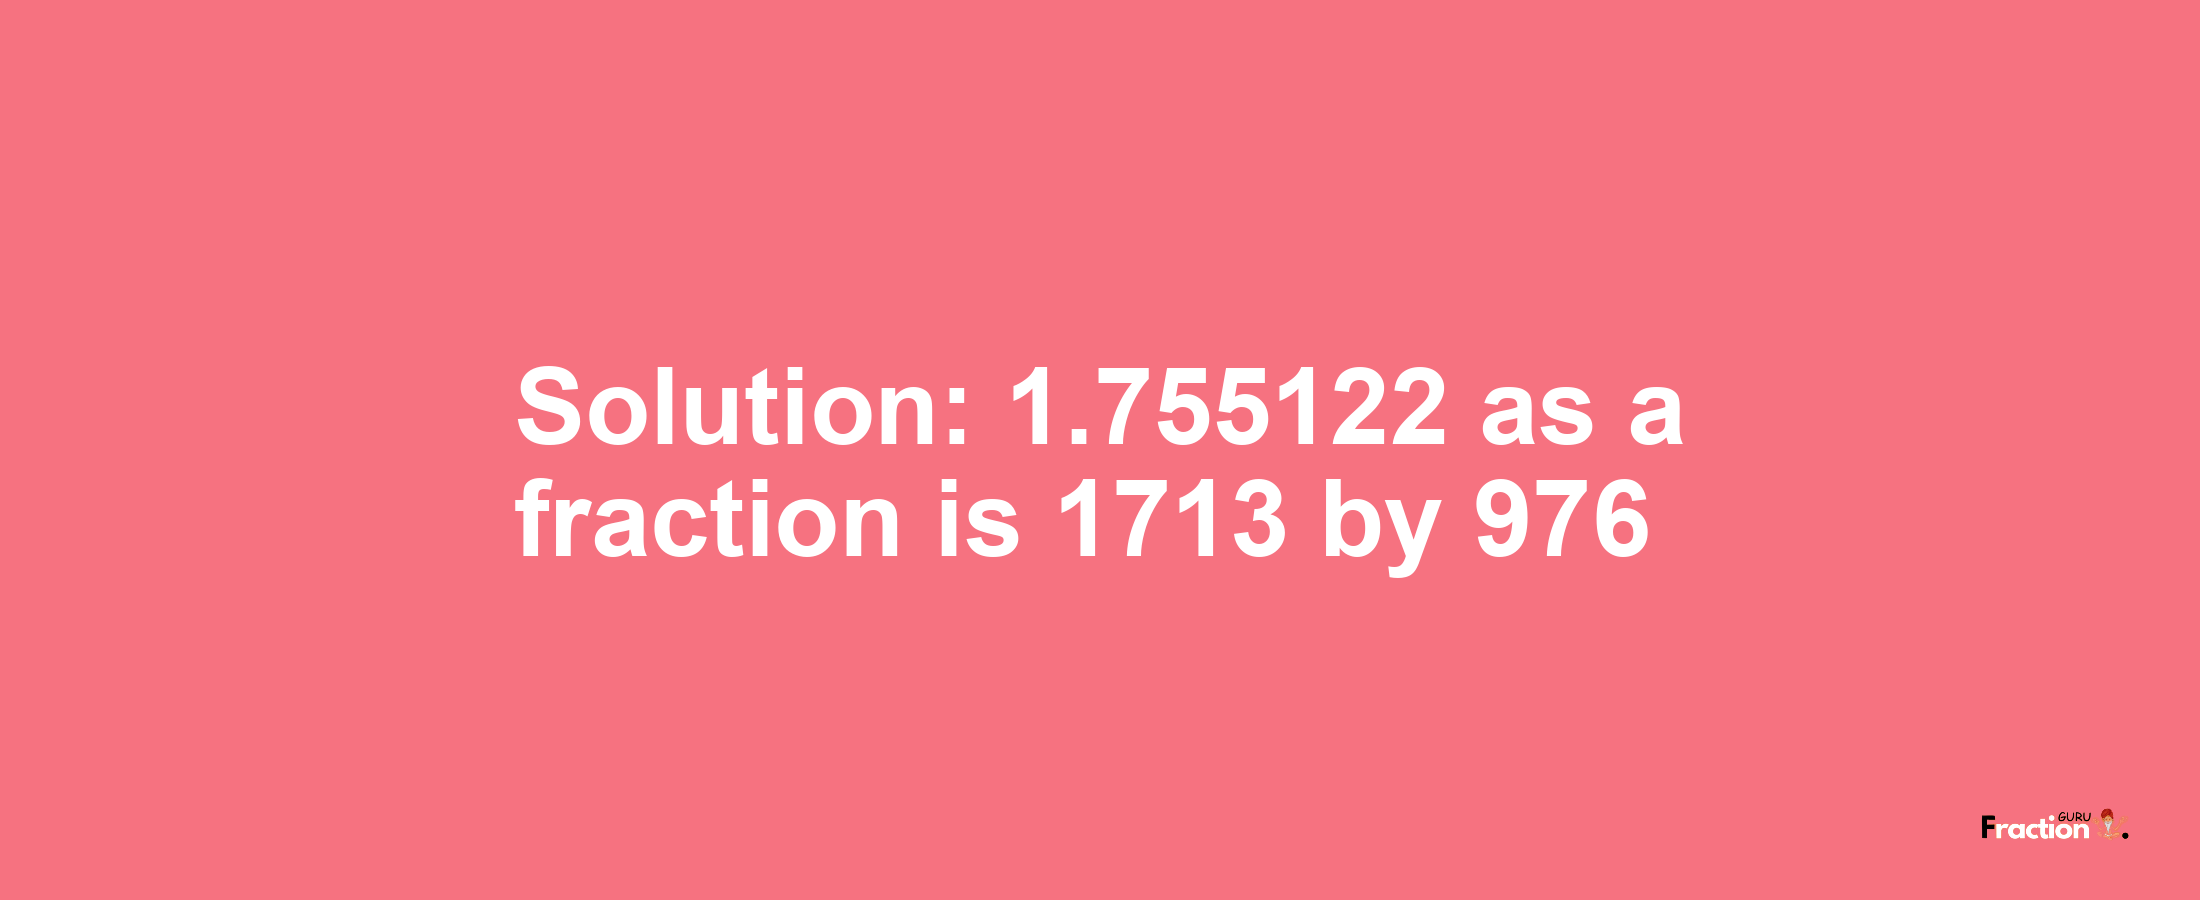 Solution:1.755122 as a fraction is 1713/976